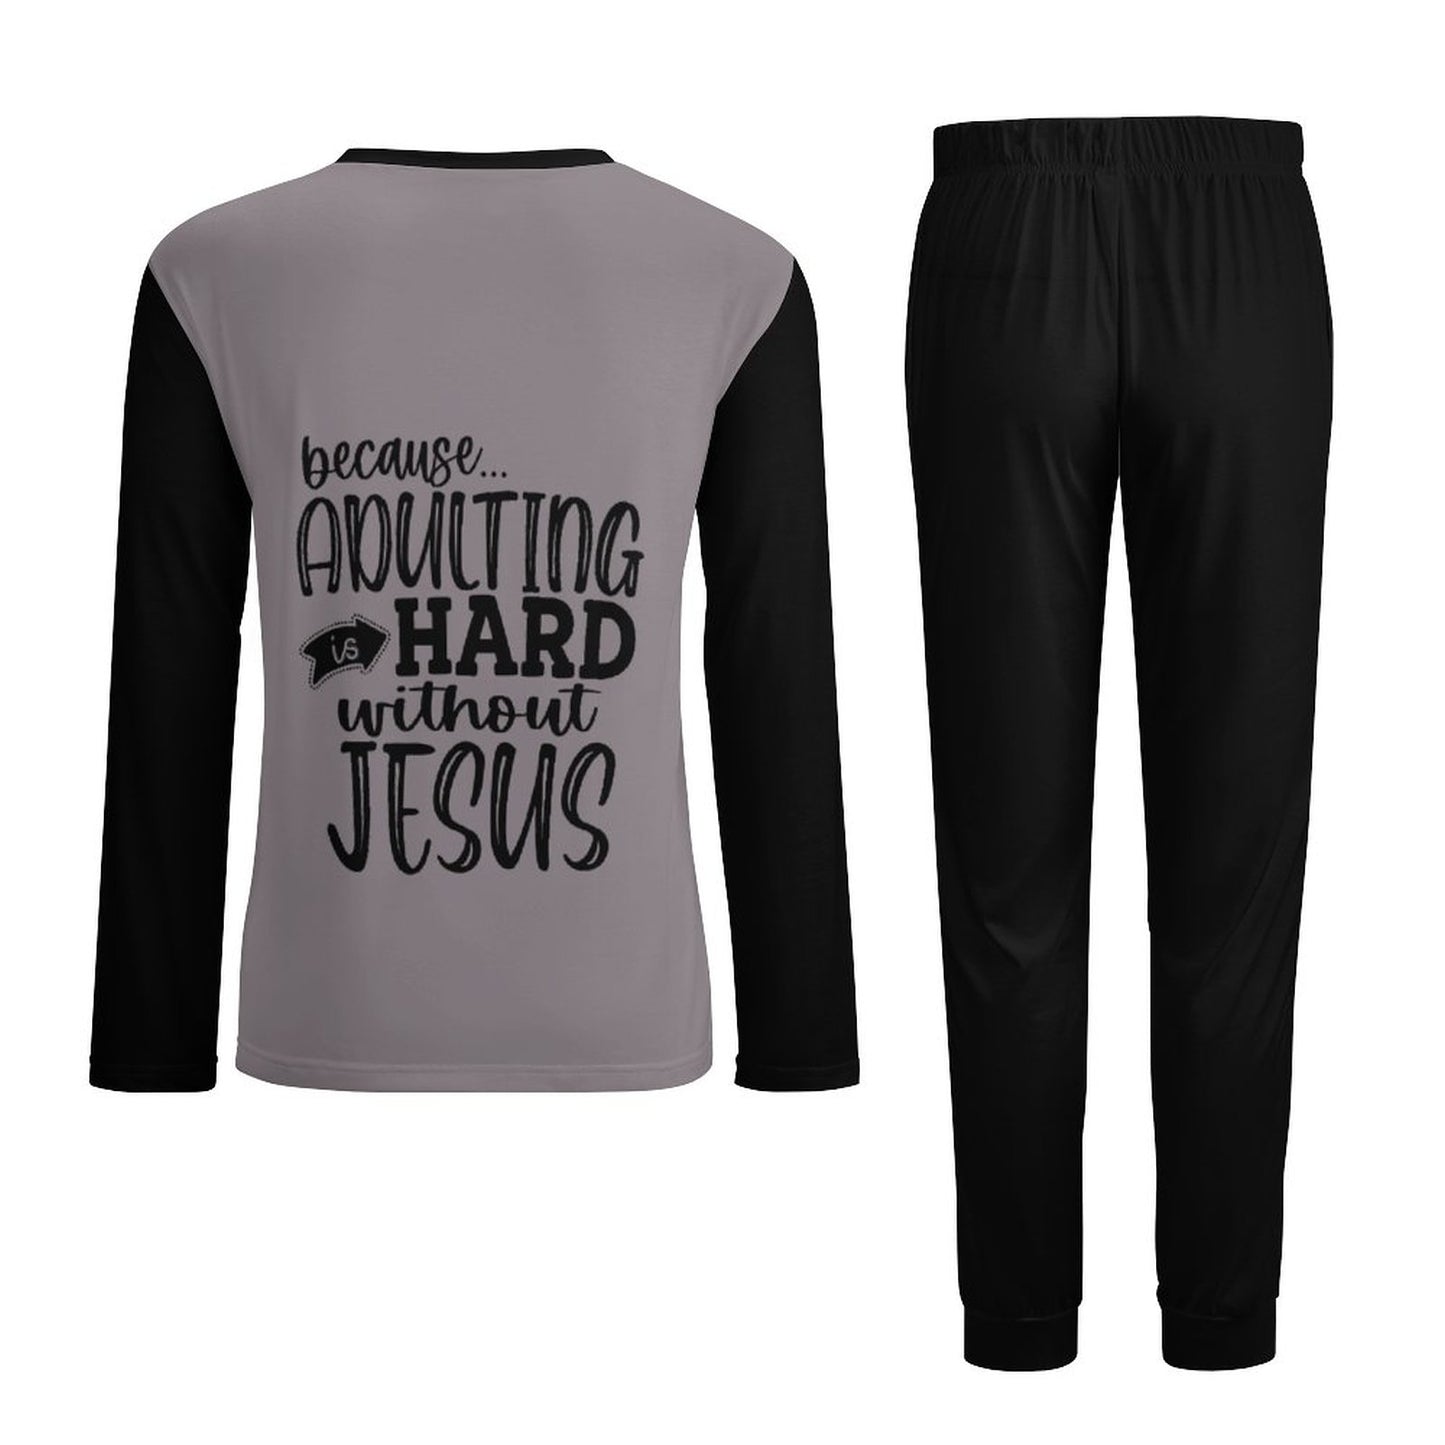 Pray On It Through It Over It Because Adulting Is Hard Without Jesus Men's Christian Pajamas